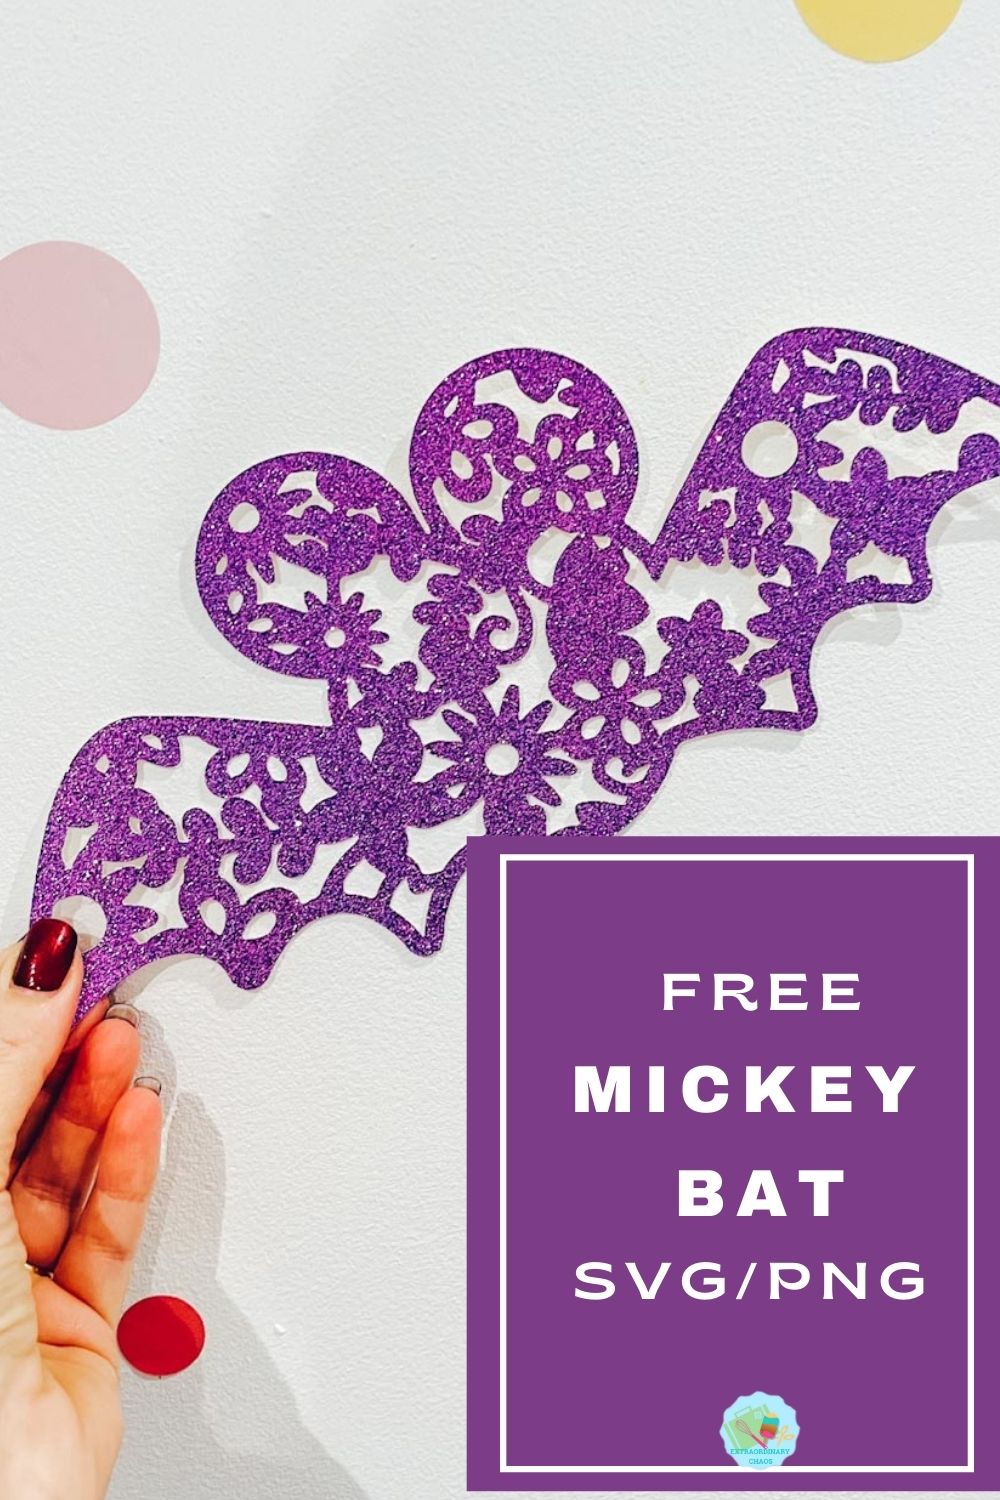 Free Mickey Bat PNG SVG for scrapbooking and crafting